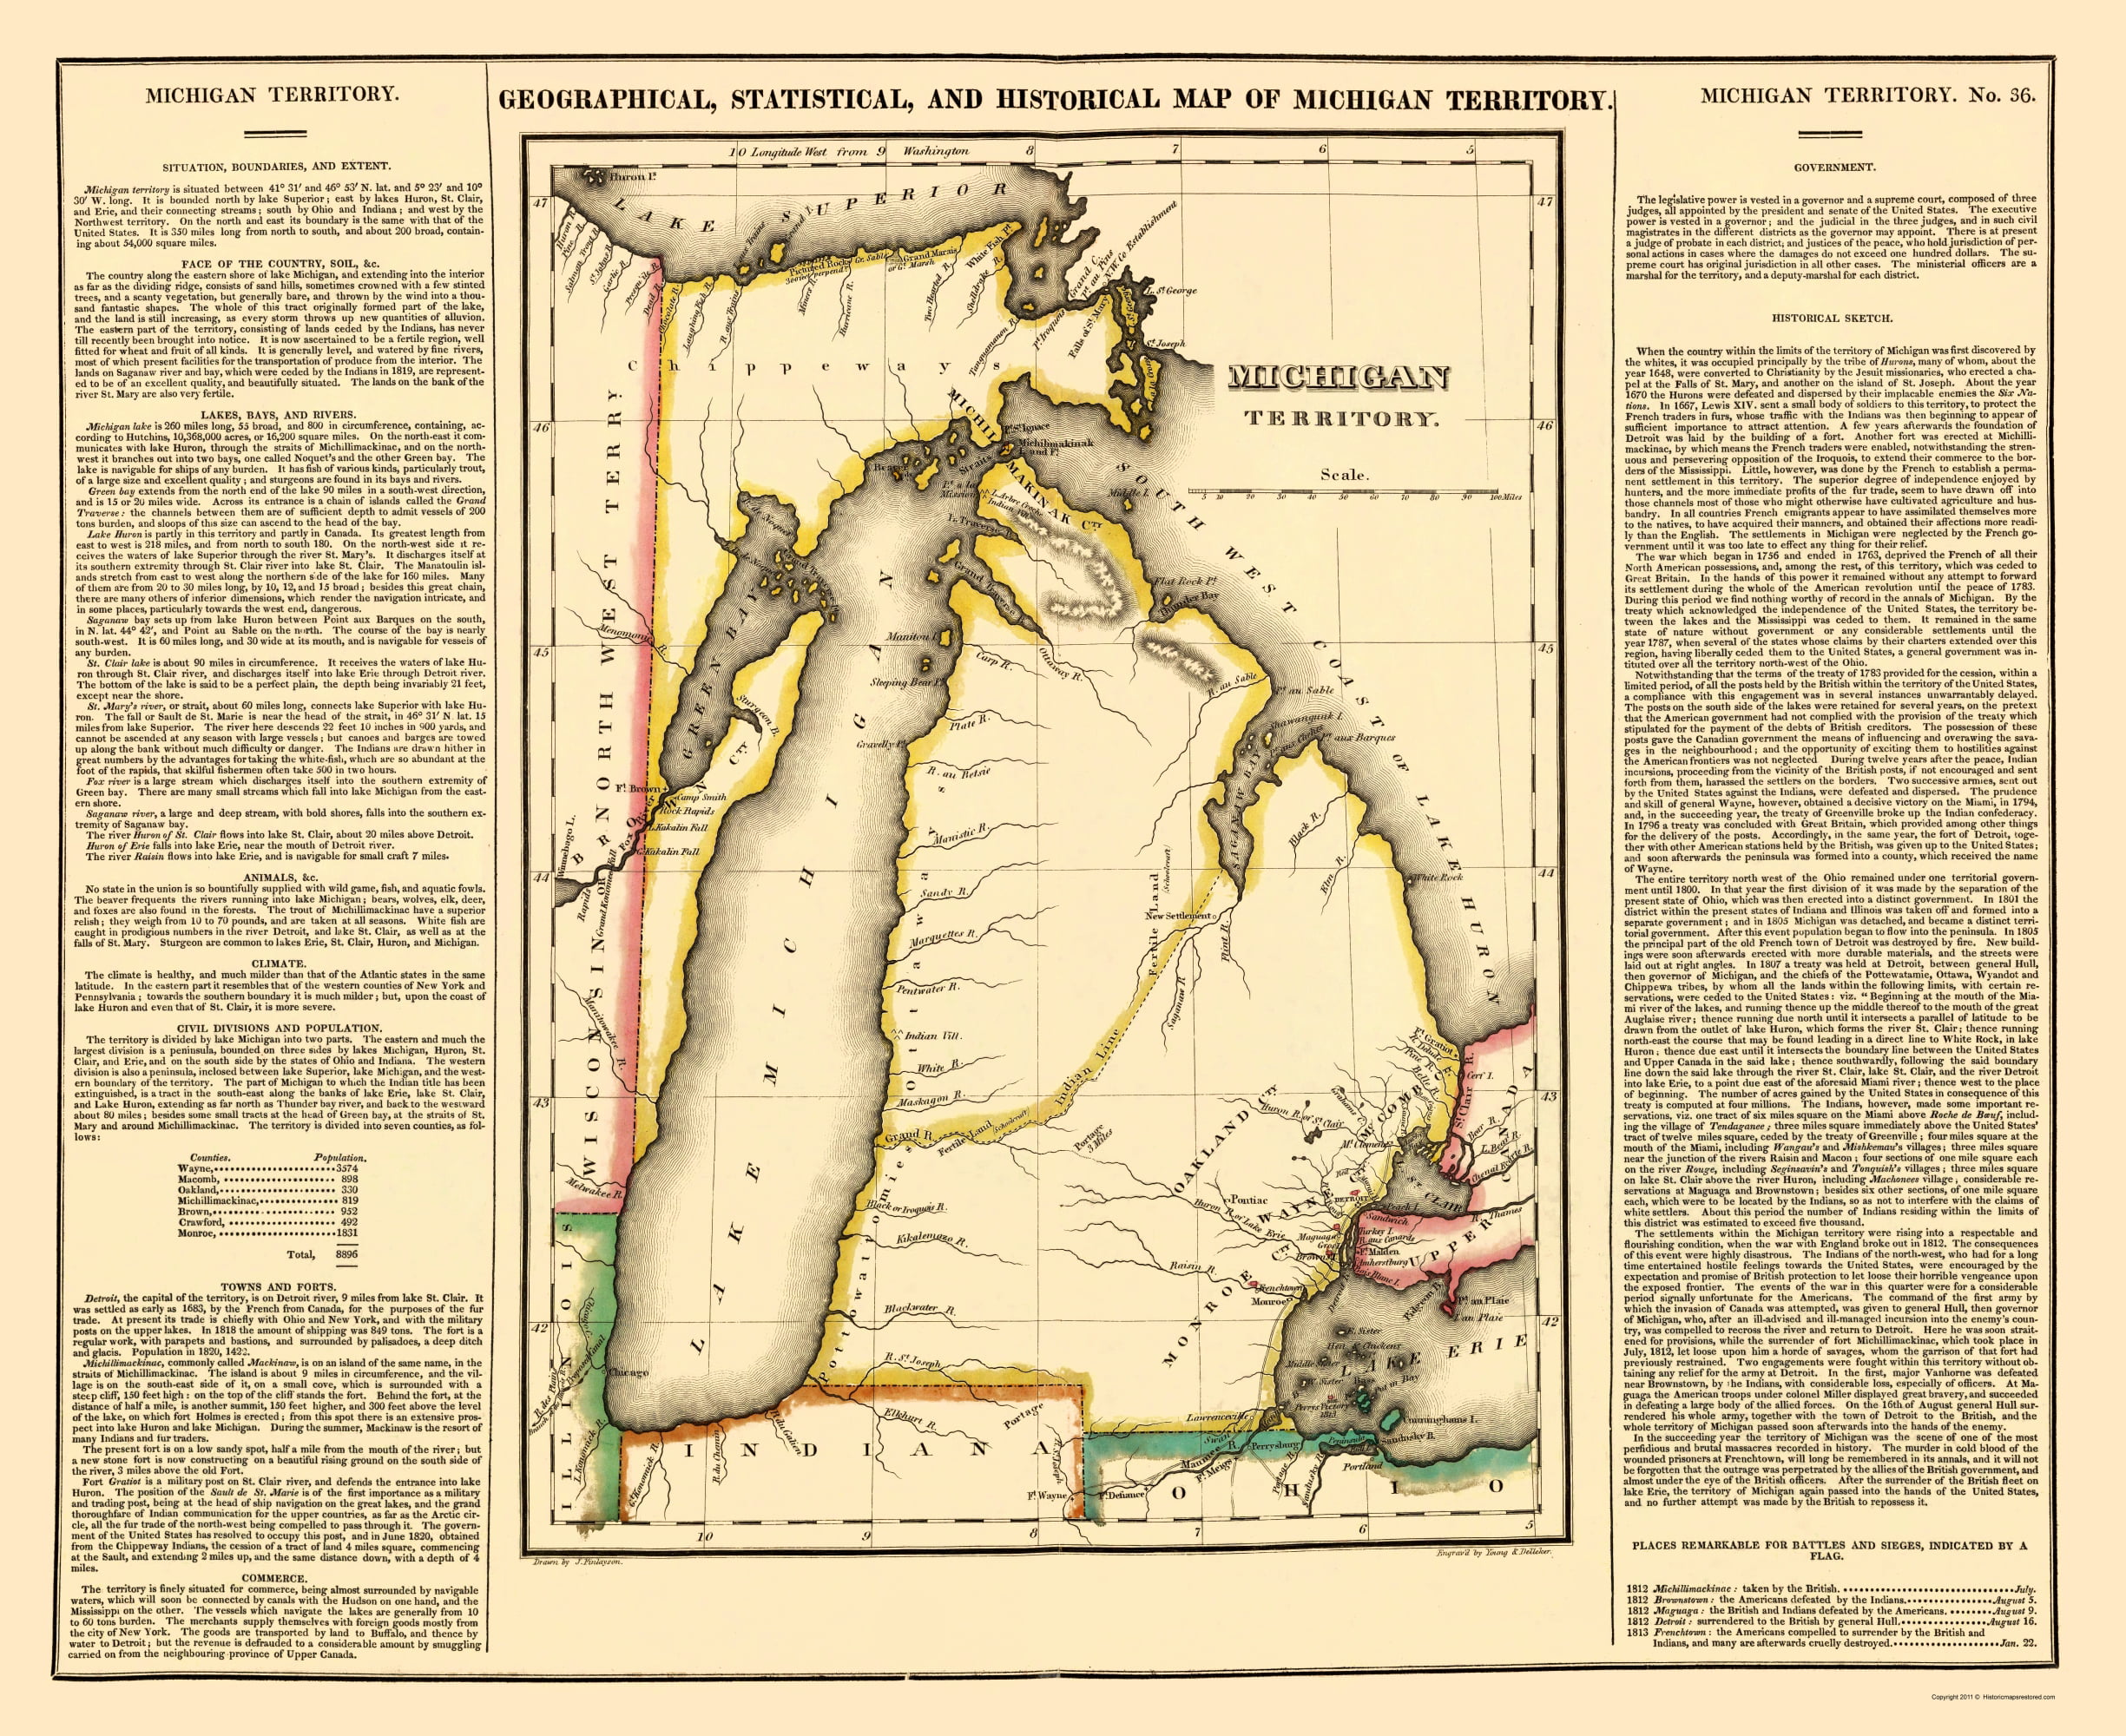 1813 Hand Coloured Map Geographical and Statistical Map of England